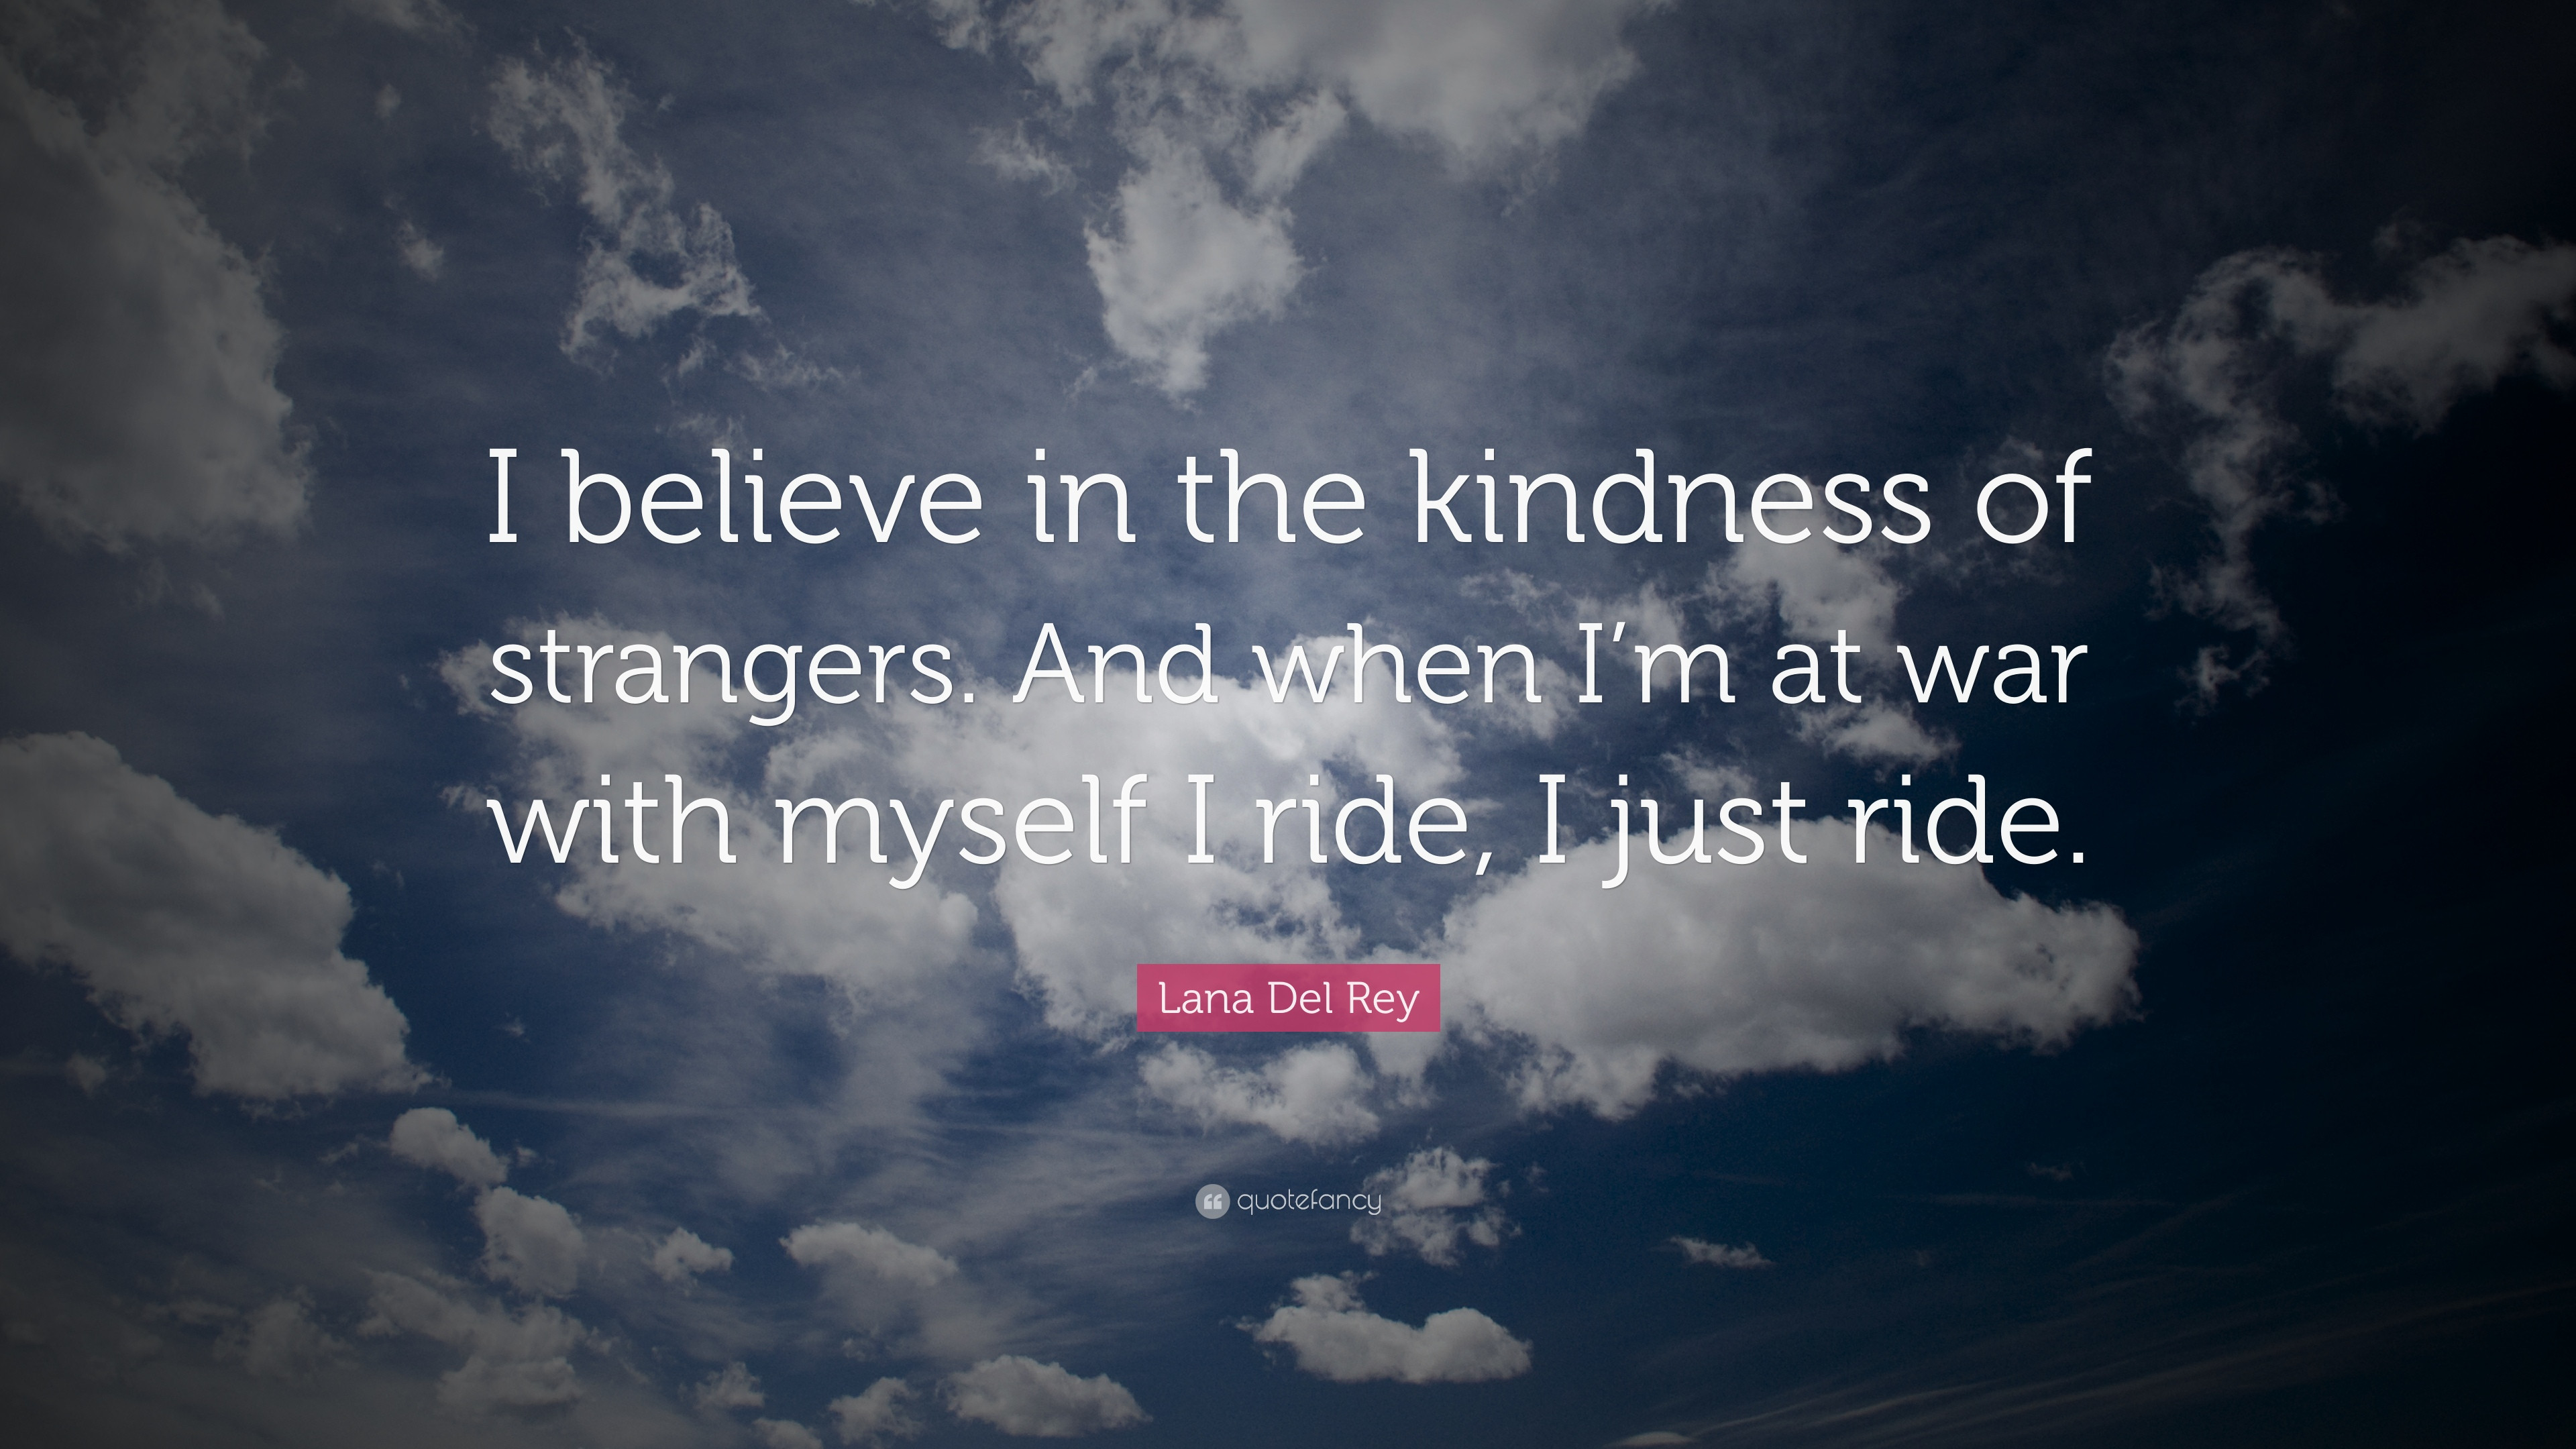 The Kindness Of Strangers Quote
 Kindness Quotes 40 wallpapers Quotefancy